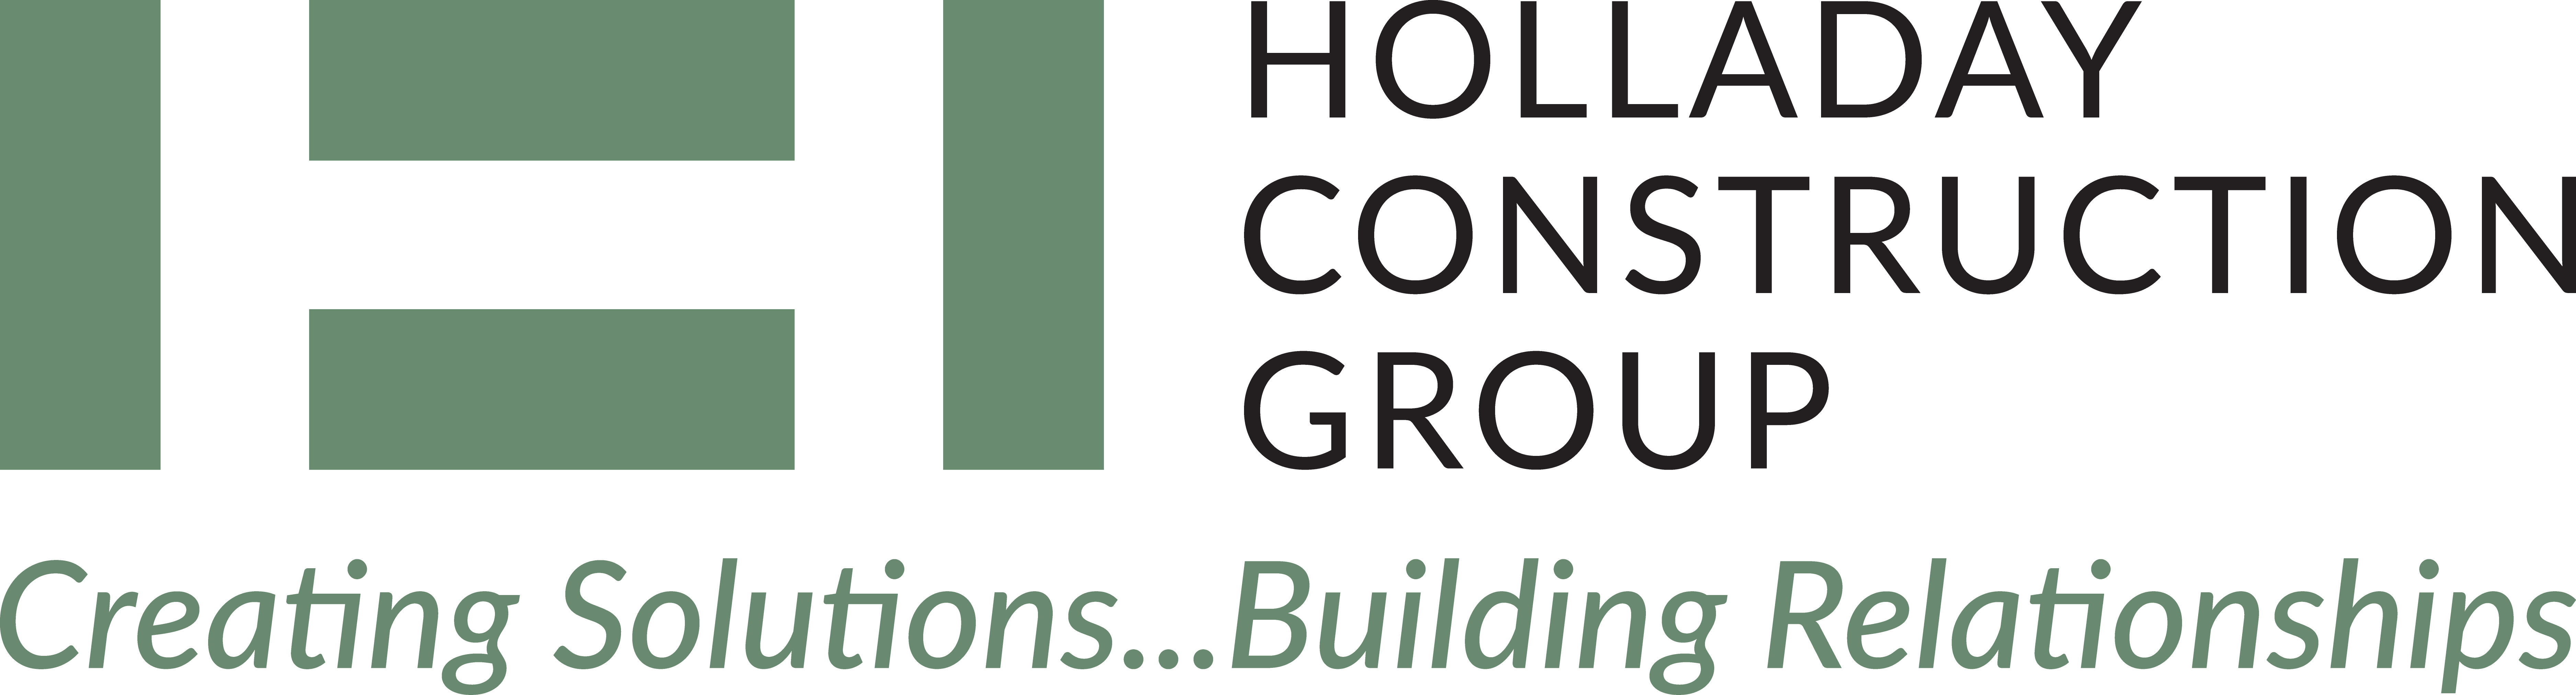 Holladay Construction Group